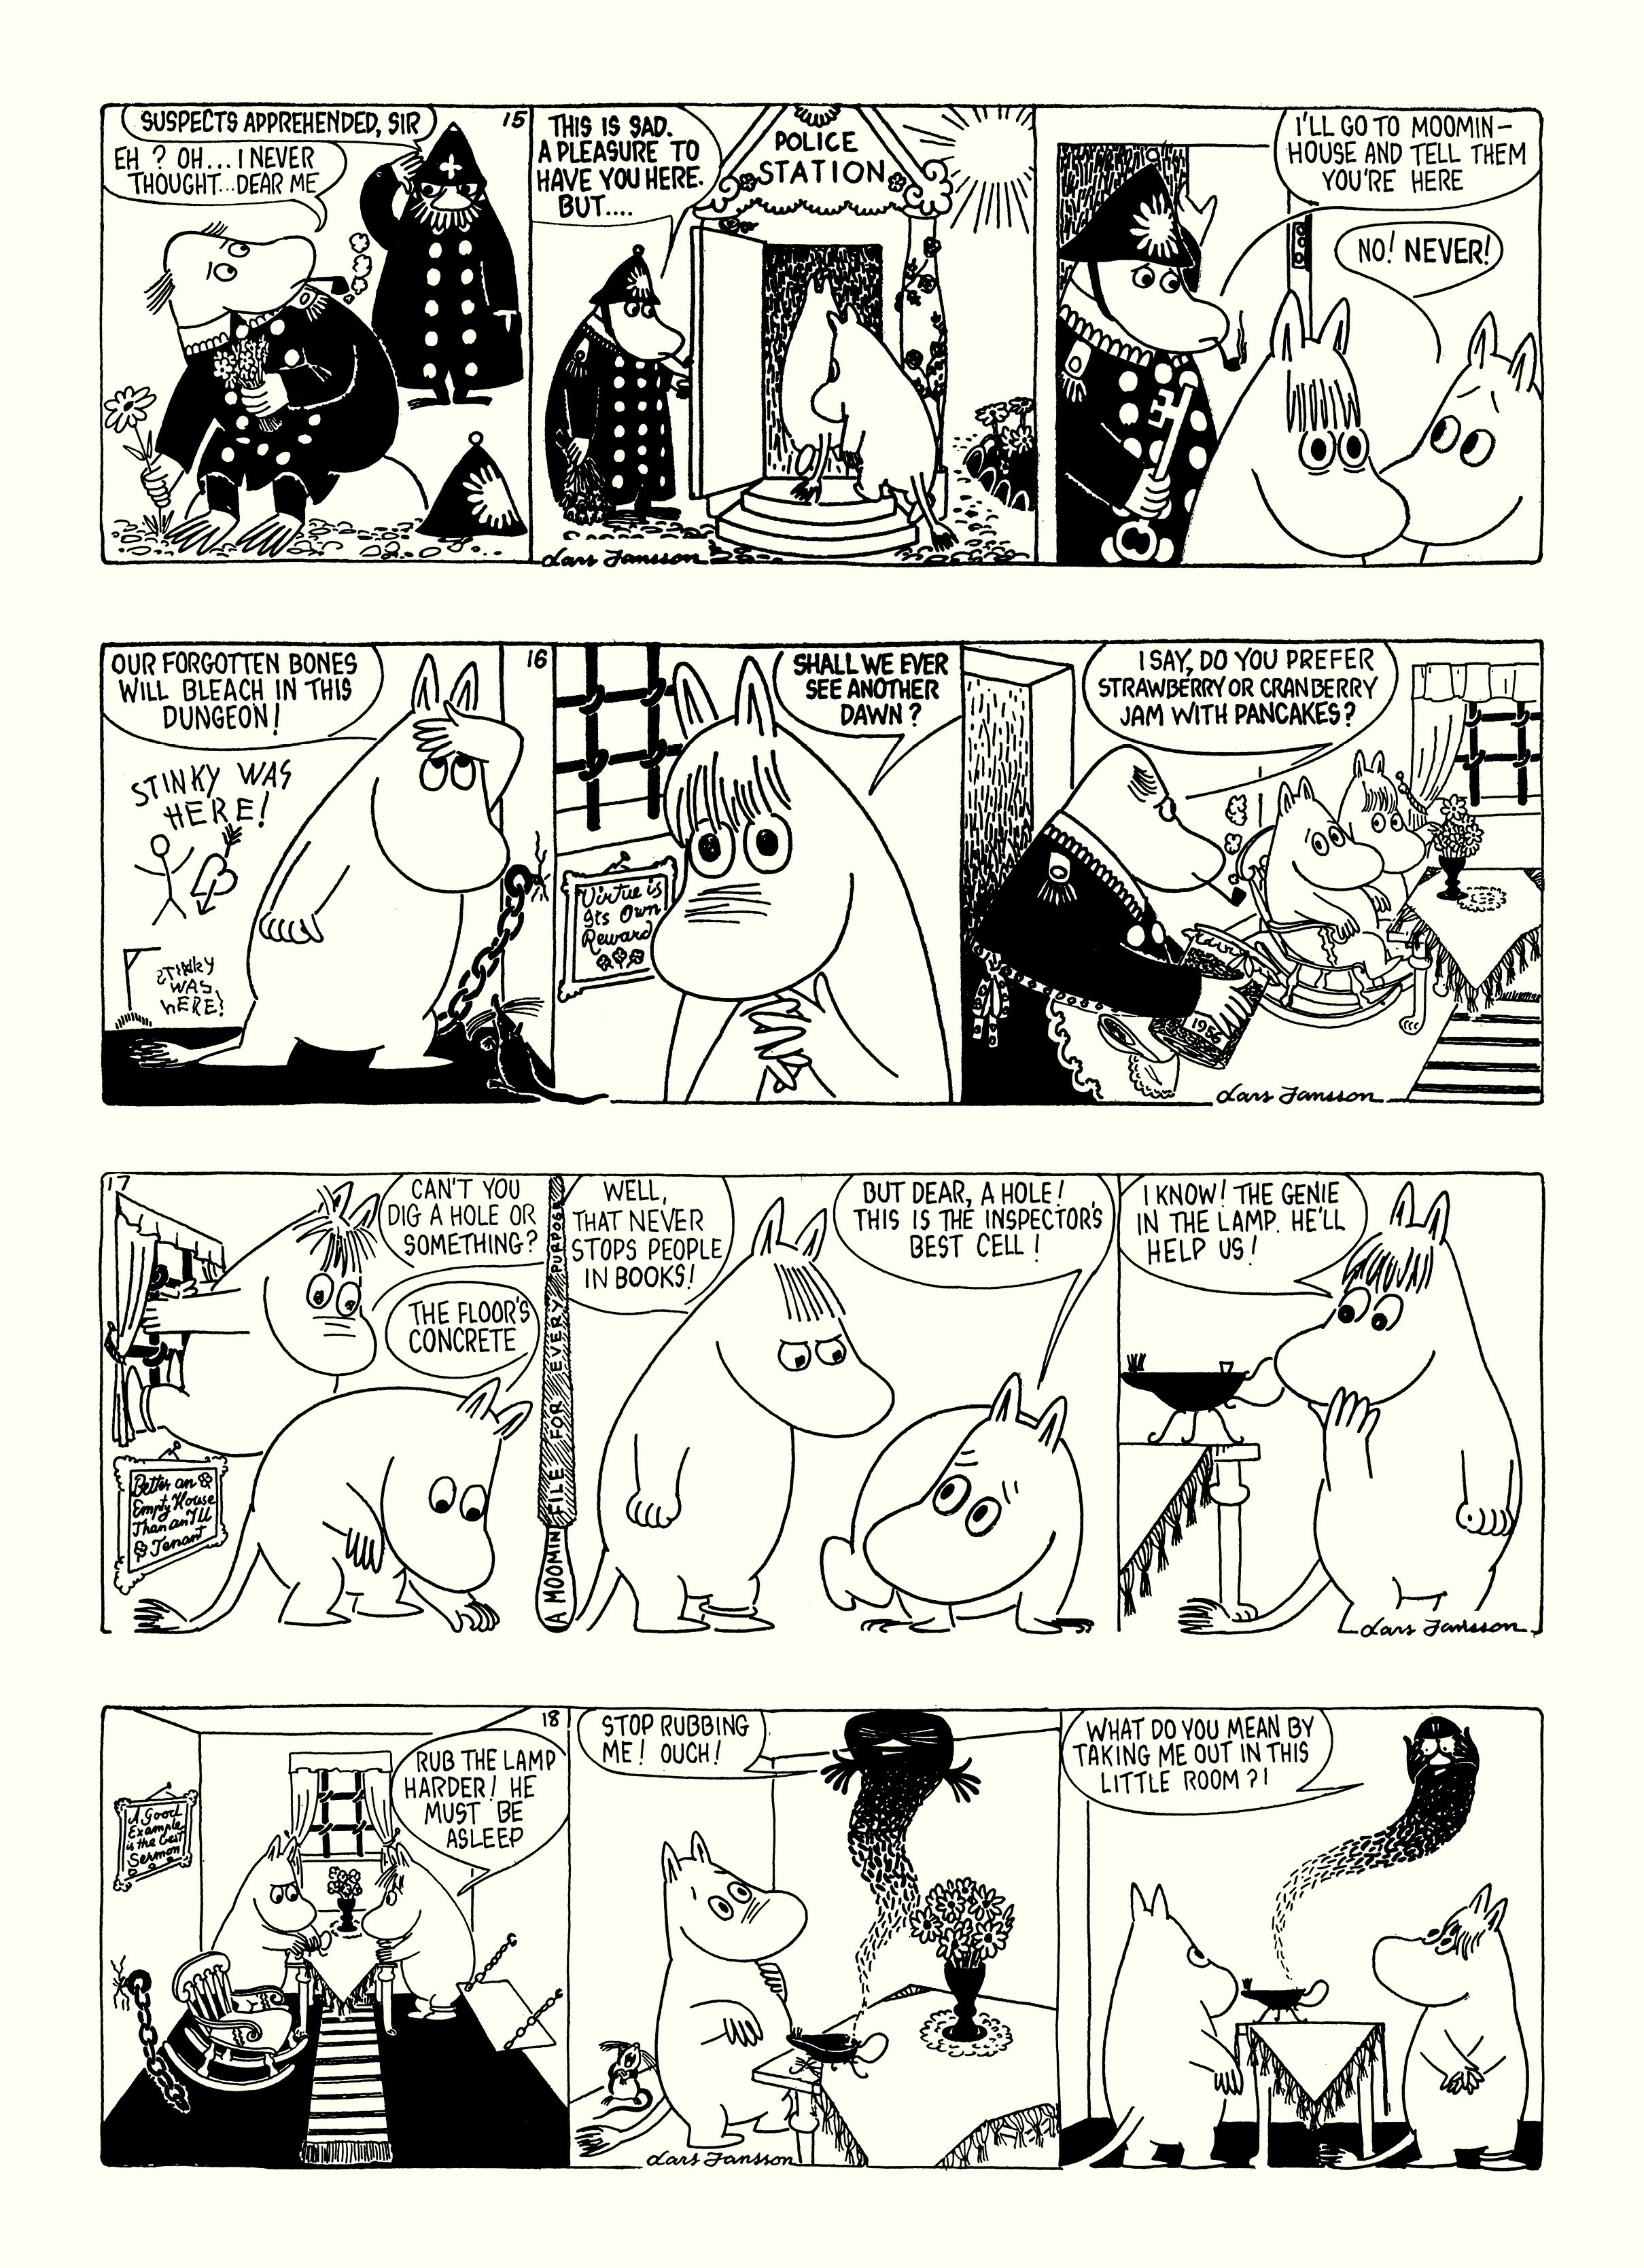 Read online Moomin: The Complete Lars Jansson Comic Strip comic -  Issue # TPB 6 - 10